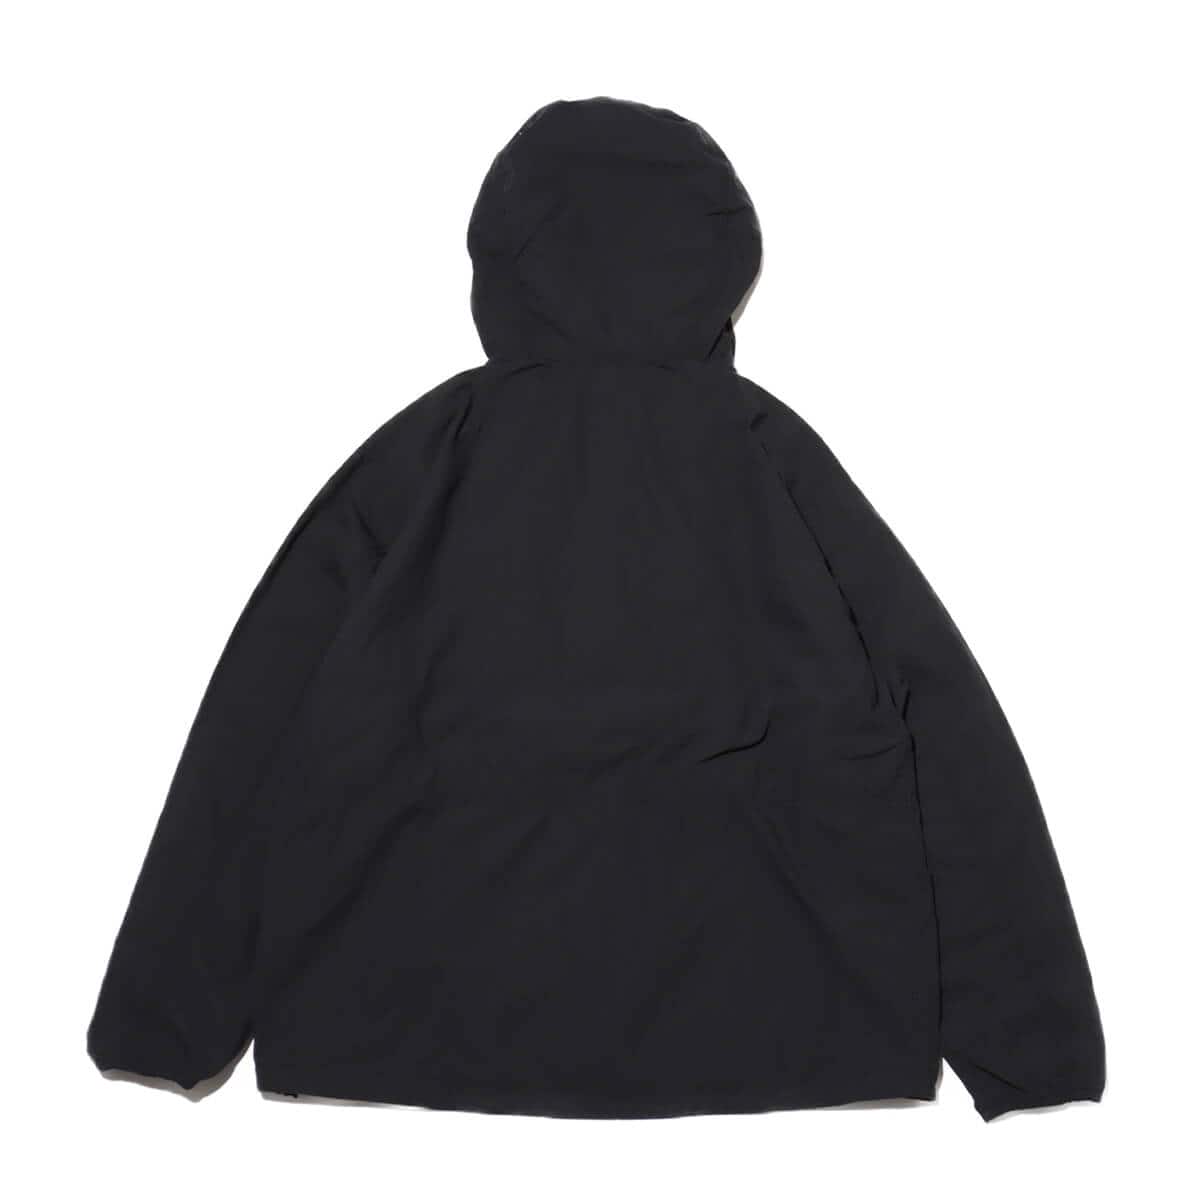 THE NORTH FACE Firefly Light Hoodie ブラック